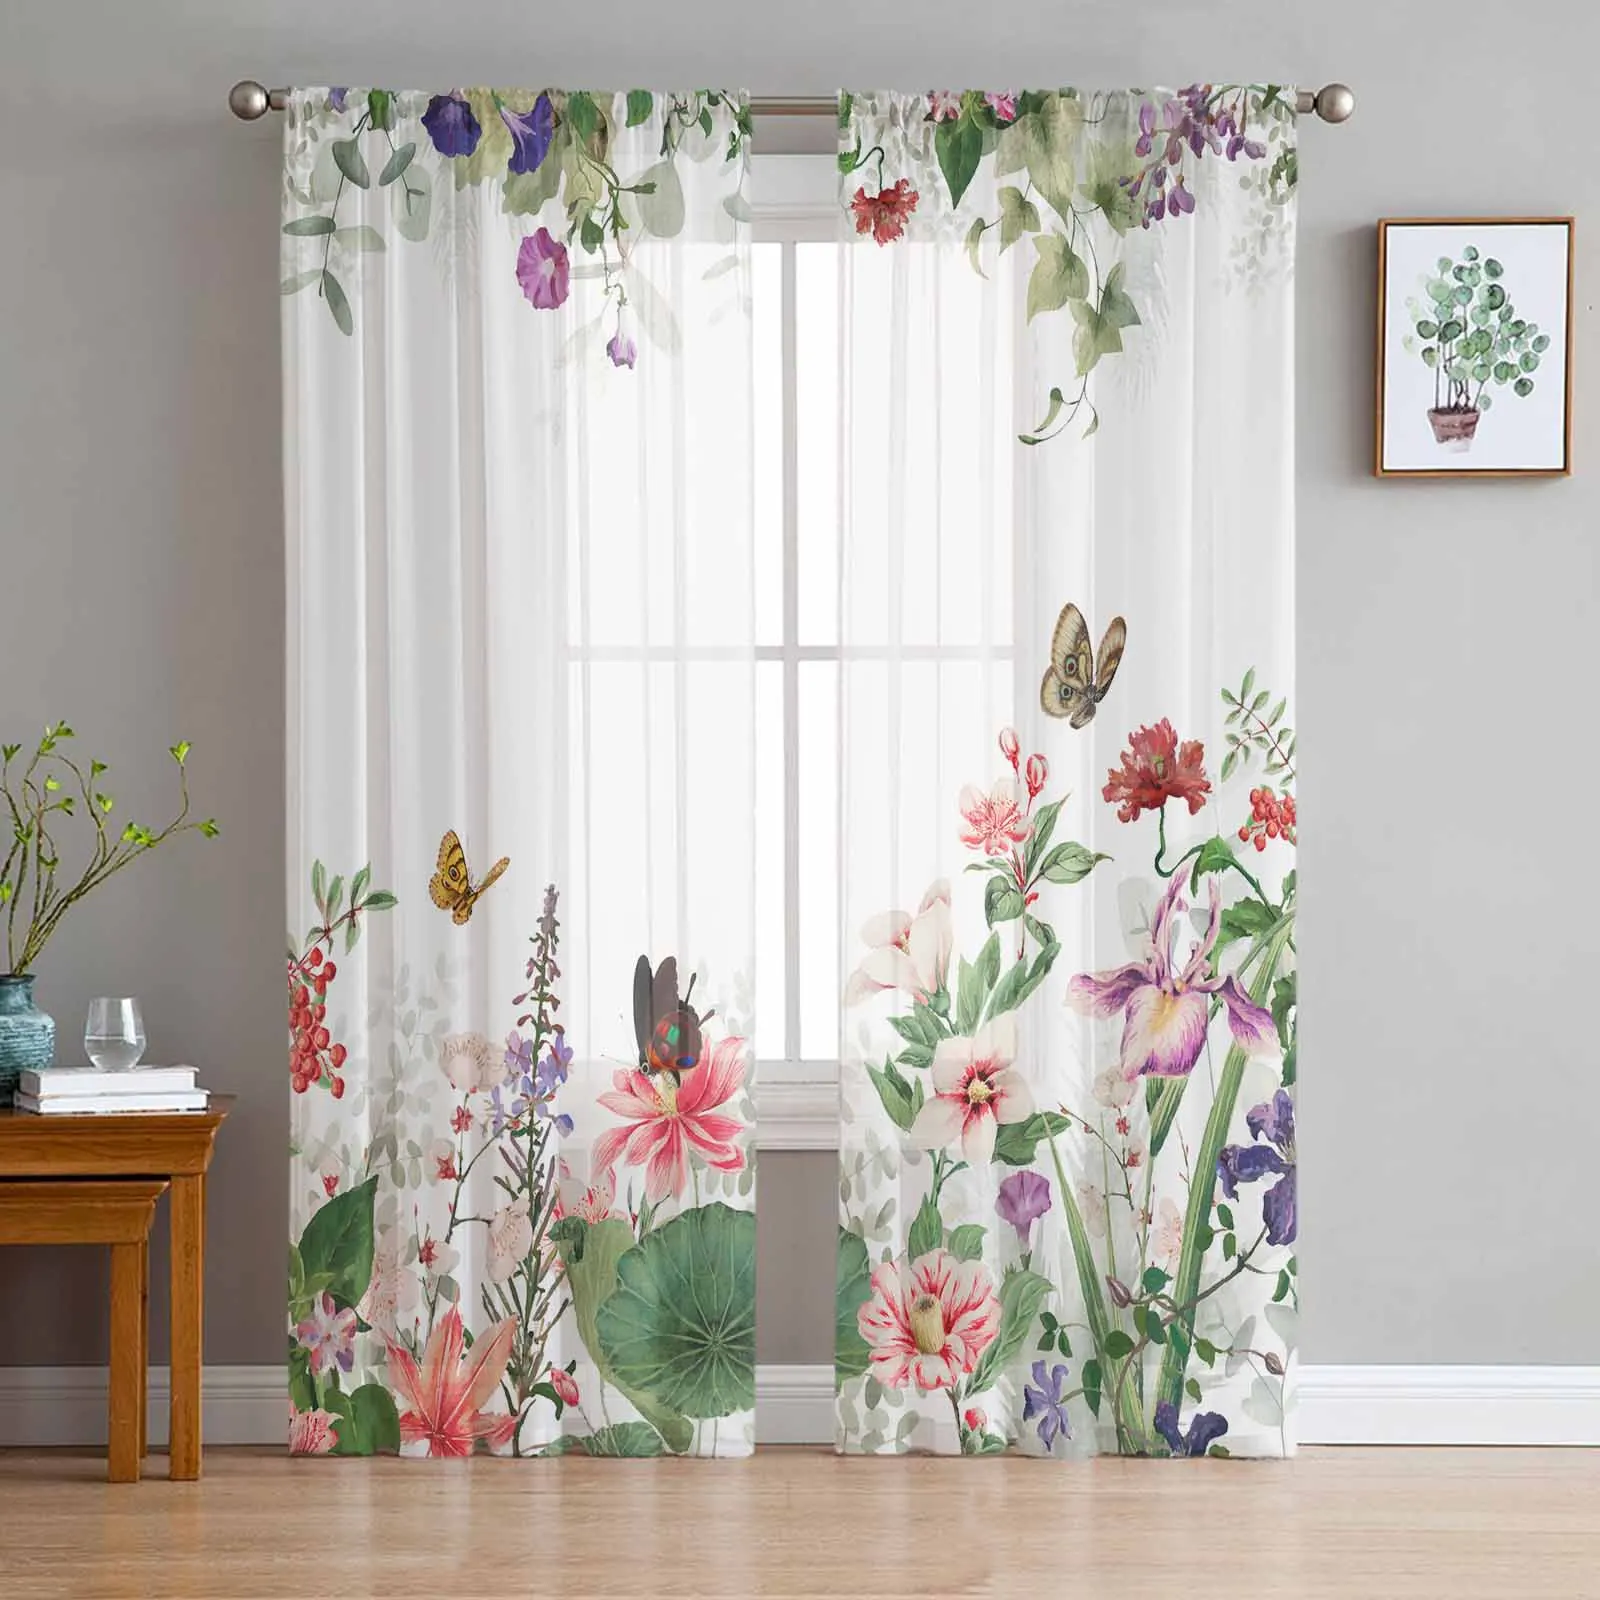 

Flowers Leaves Plants Butterflies Retro Style Sheer Curtains for Living Room Home Decor Tulle Curtain Bedroom Voile Drapes